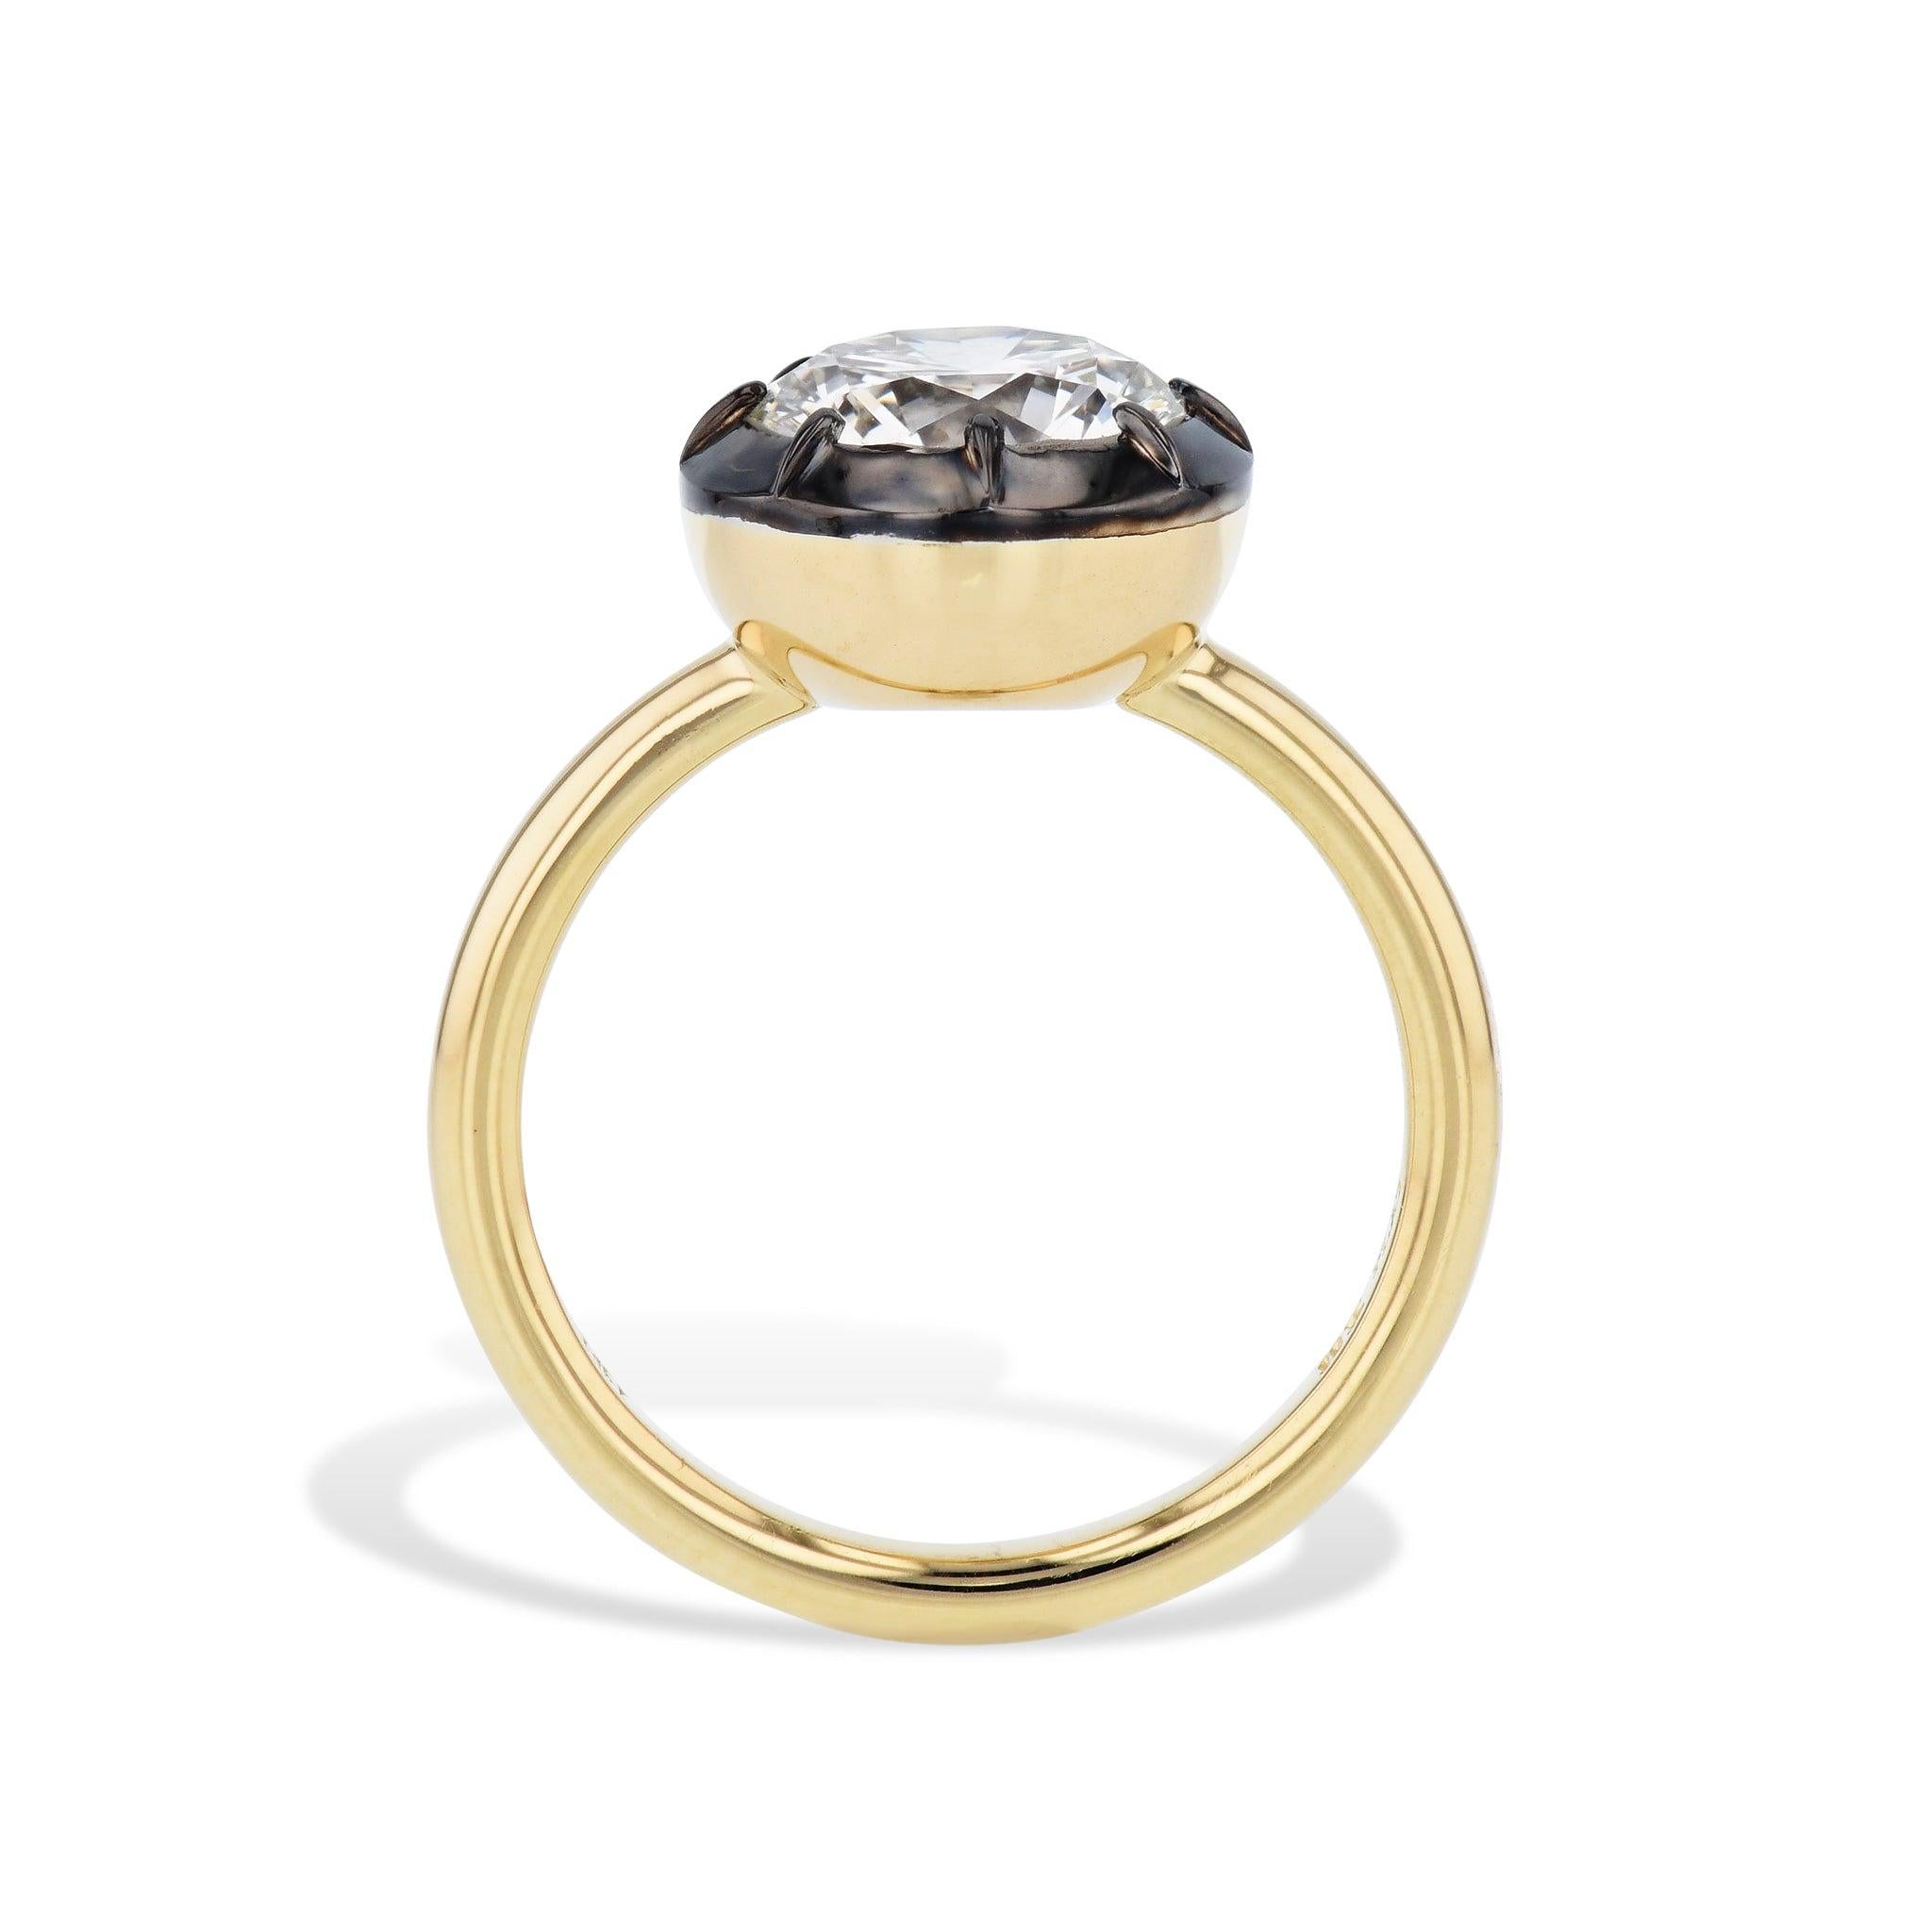 Handmade H&H Collection, this Round Brilliant Cut Diamond Black Ruthenium Engagement Ring features a stunning 2.25ct Diamond in a prong setting, secured in a 
Black Ruthenium basket with platinum and 18kt. This irresistible size 6.5 ring beautifully